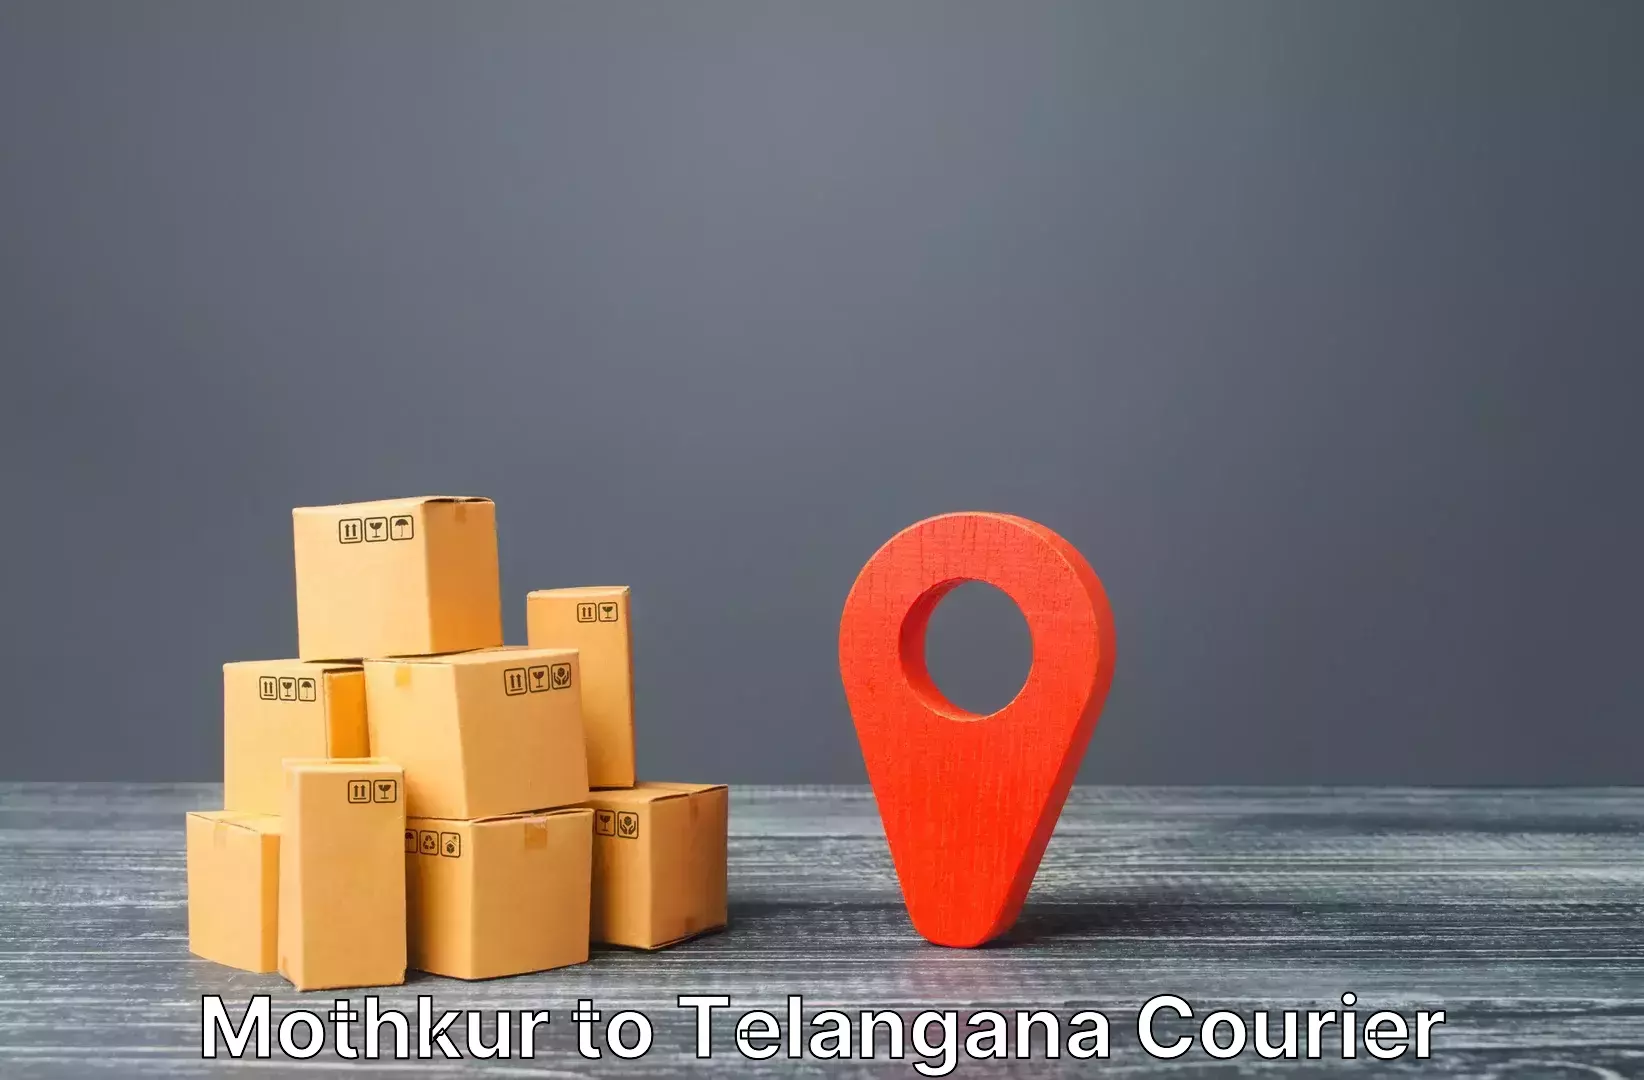 Fast track baggage delivery Mothkur to Kacheguda